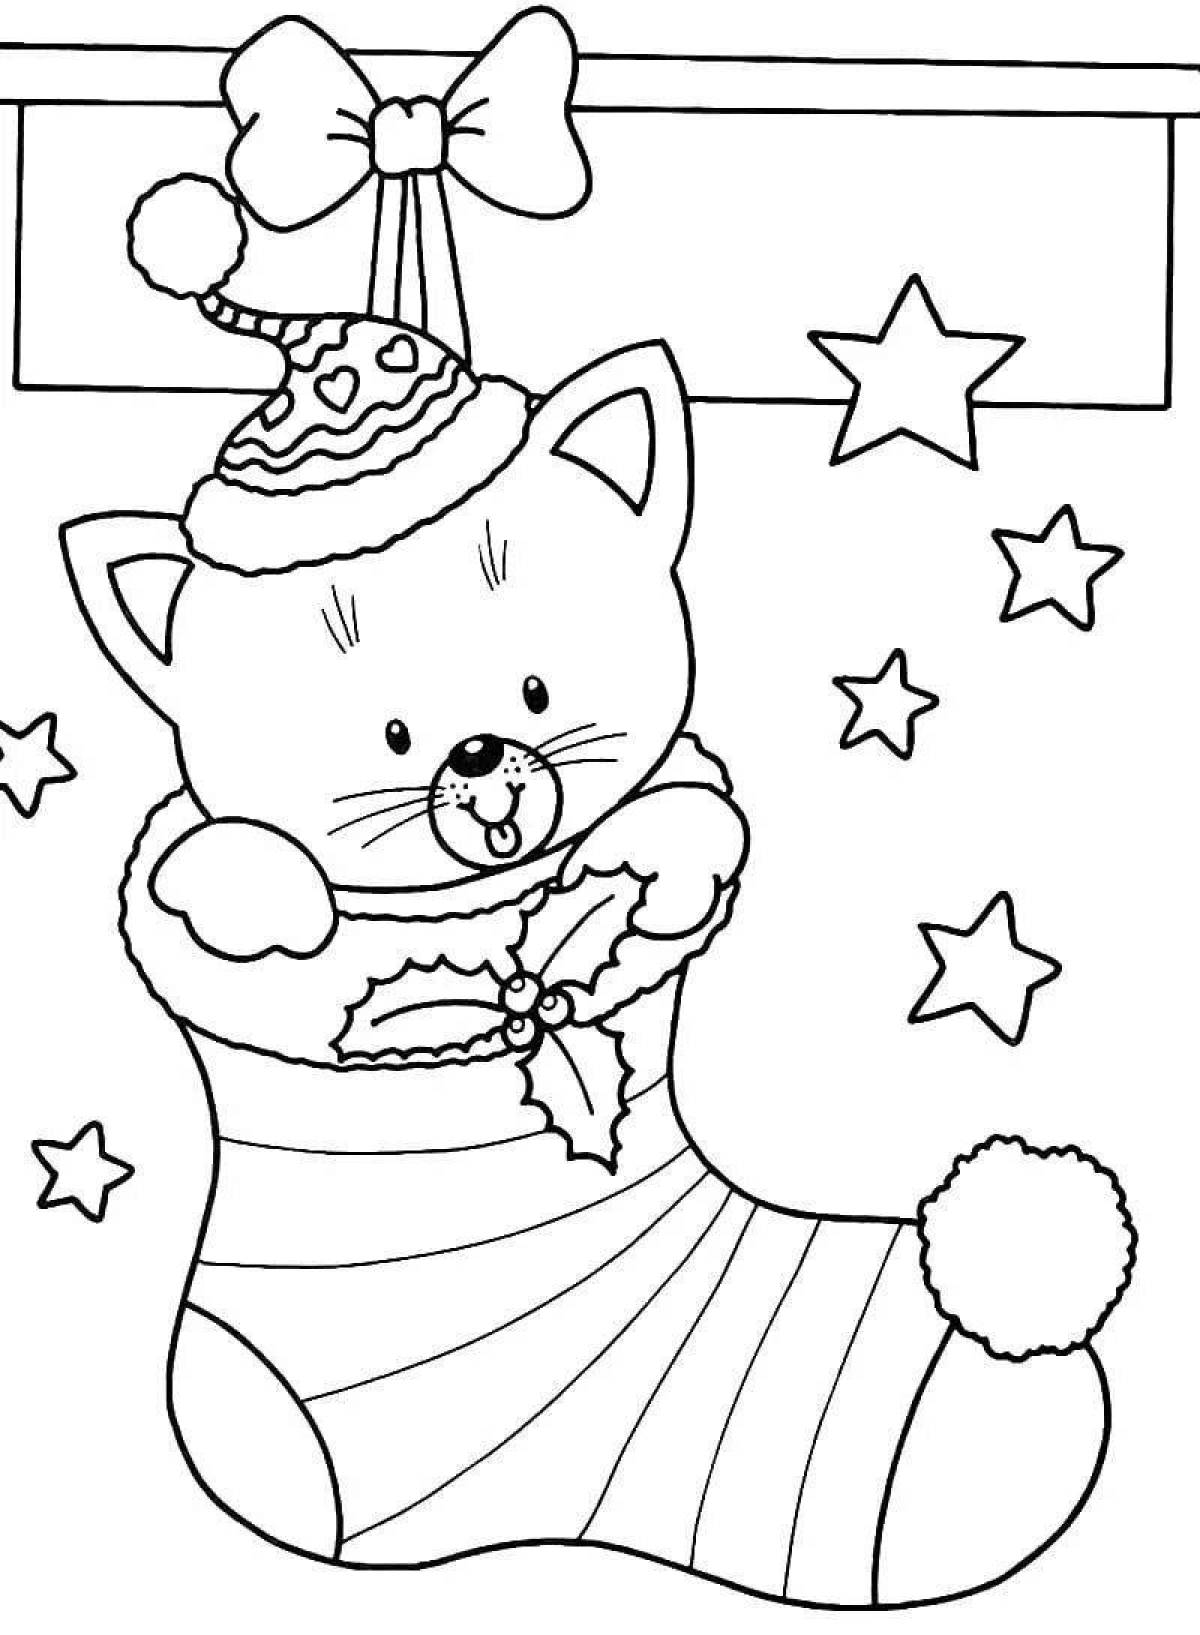 Coloring book with colorful Christmas print